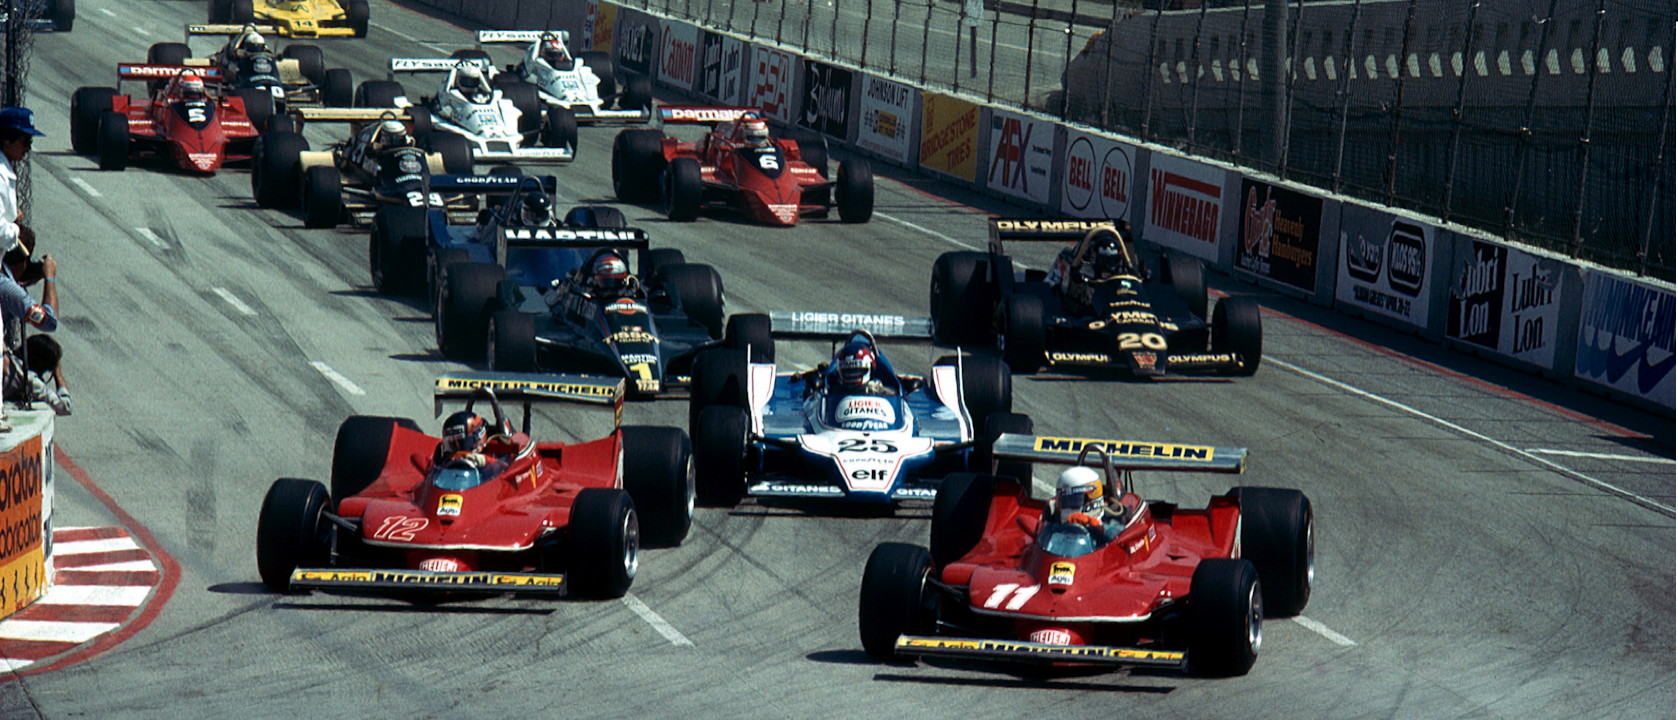 The start of the US West Grand Prix in Long Beach on 08 April 1979.